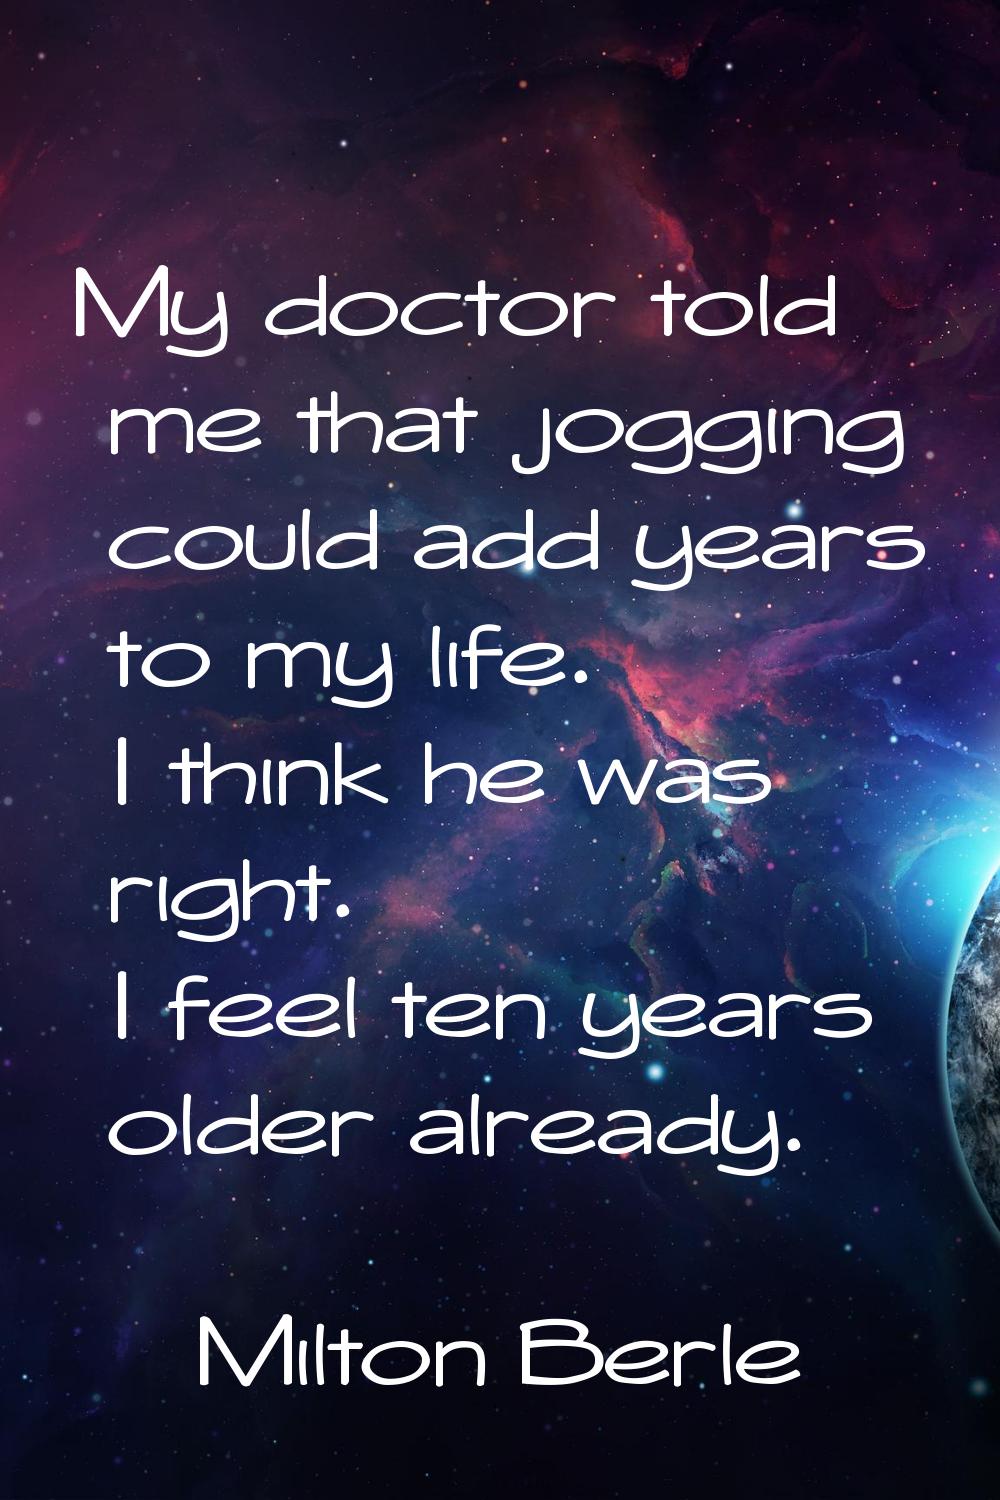 My doctor told me that jogging could add years to my life. I think he was right. I feel ten years o